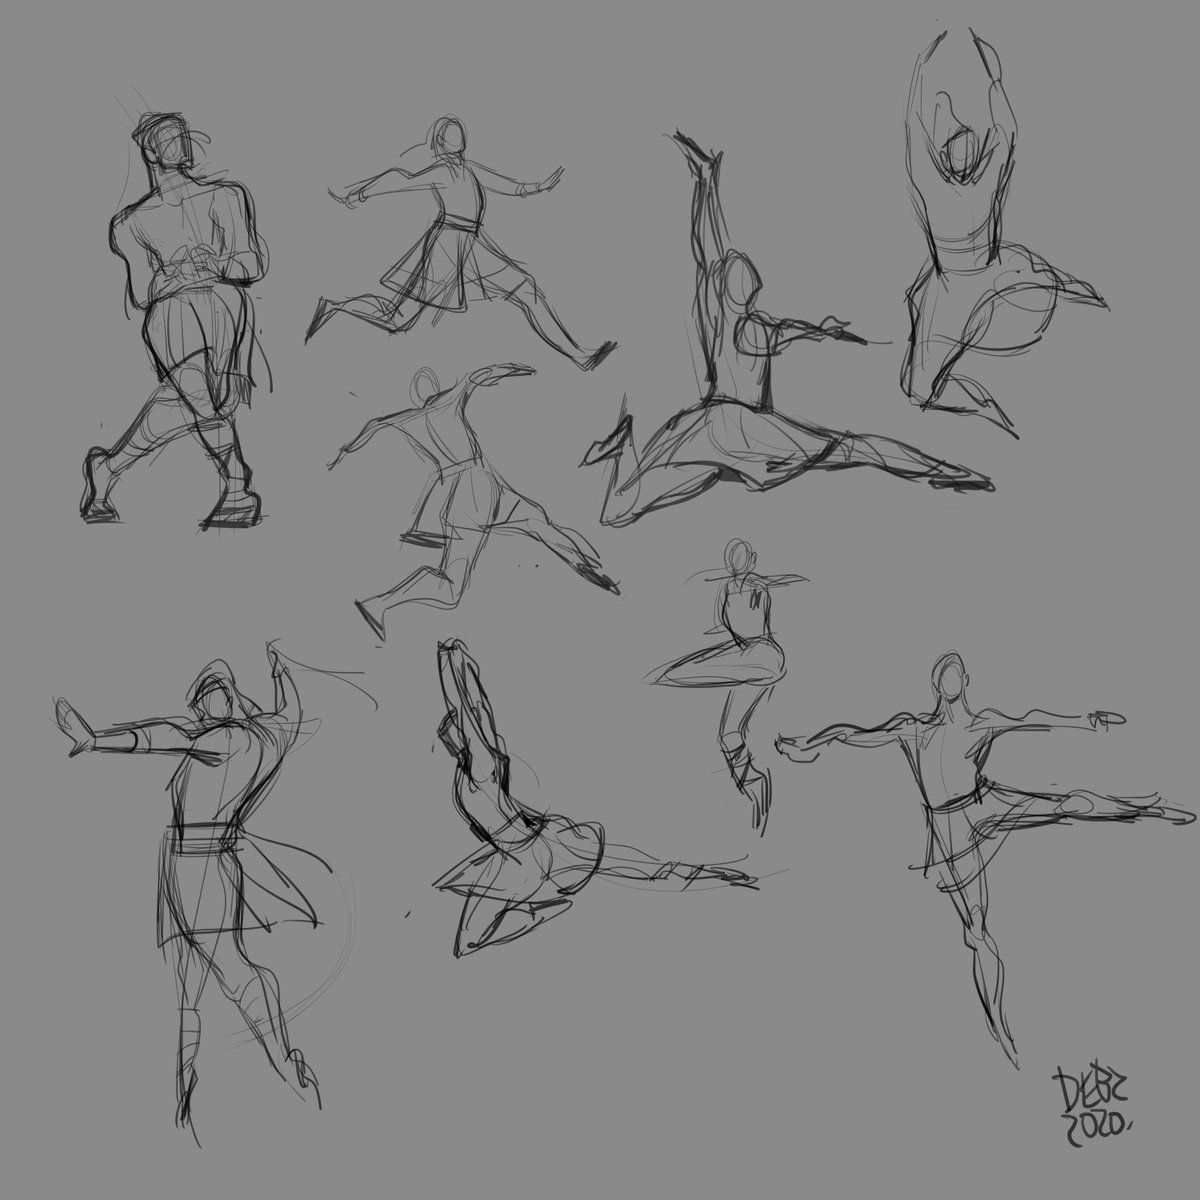 More studies! I watched the musical another time, this time pausing and repeating scenes to capture expressions and particular movement #phantomoftheopera 